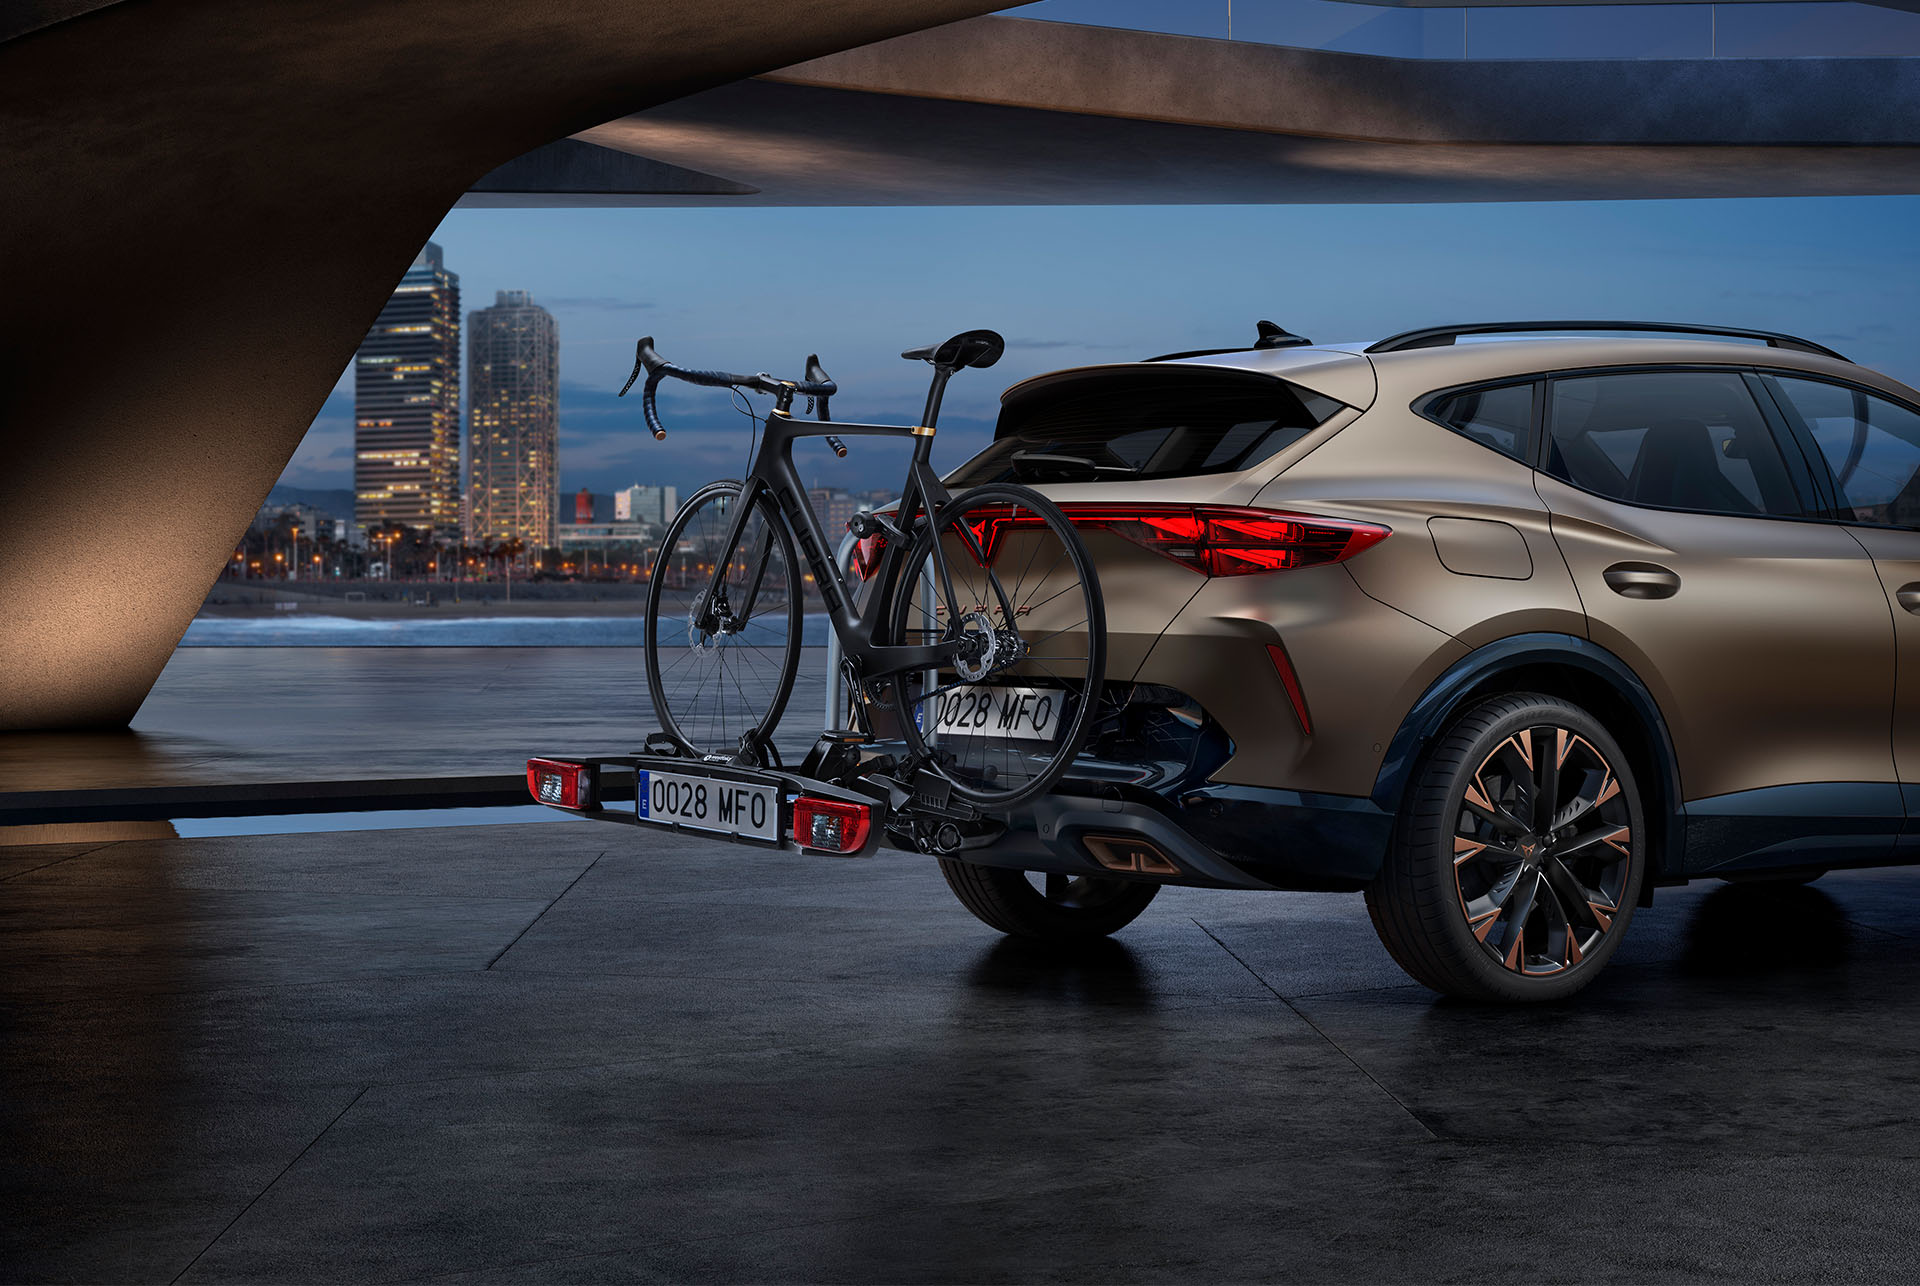 New century bronze CUPRA Formentor 2024 rear and towing bike rack car accessory, city skyline in the background.